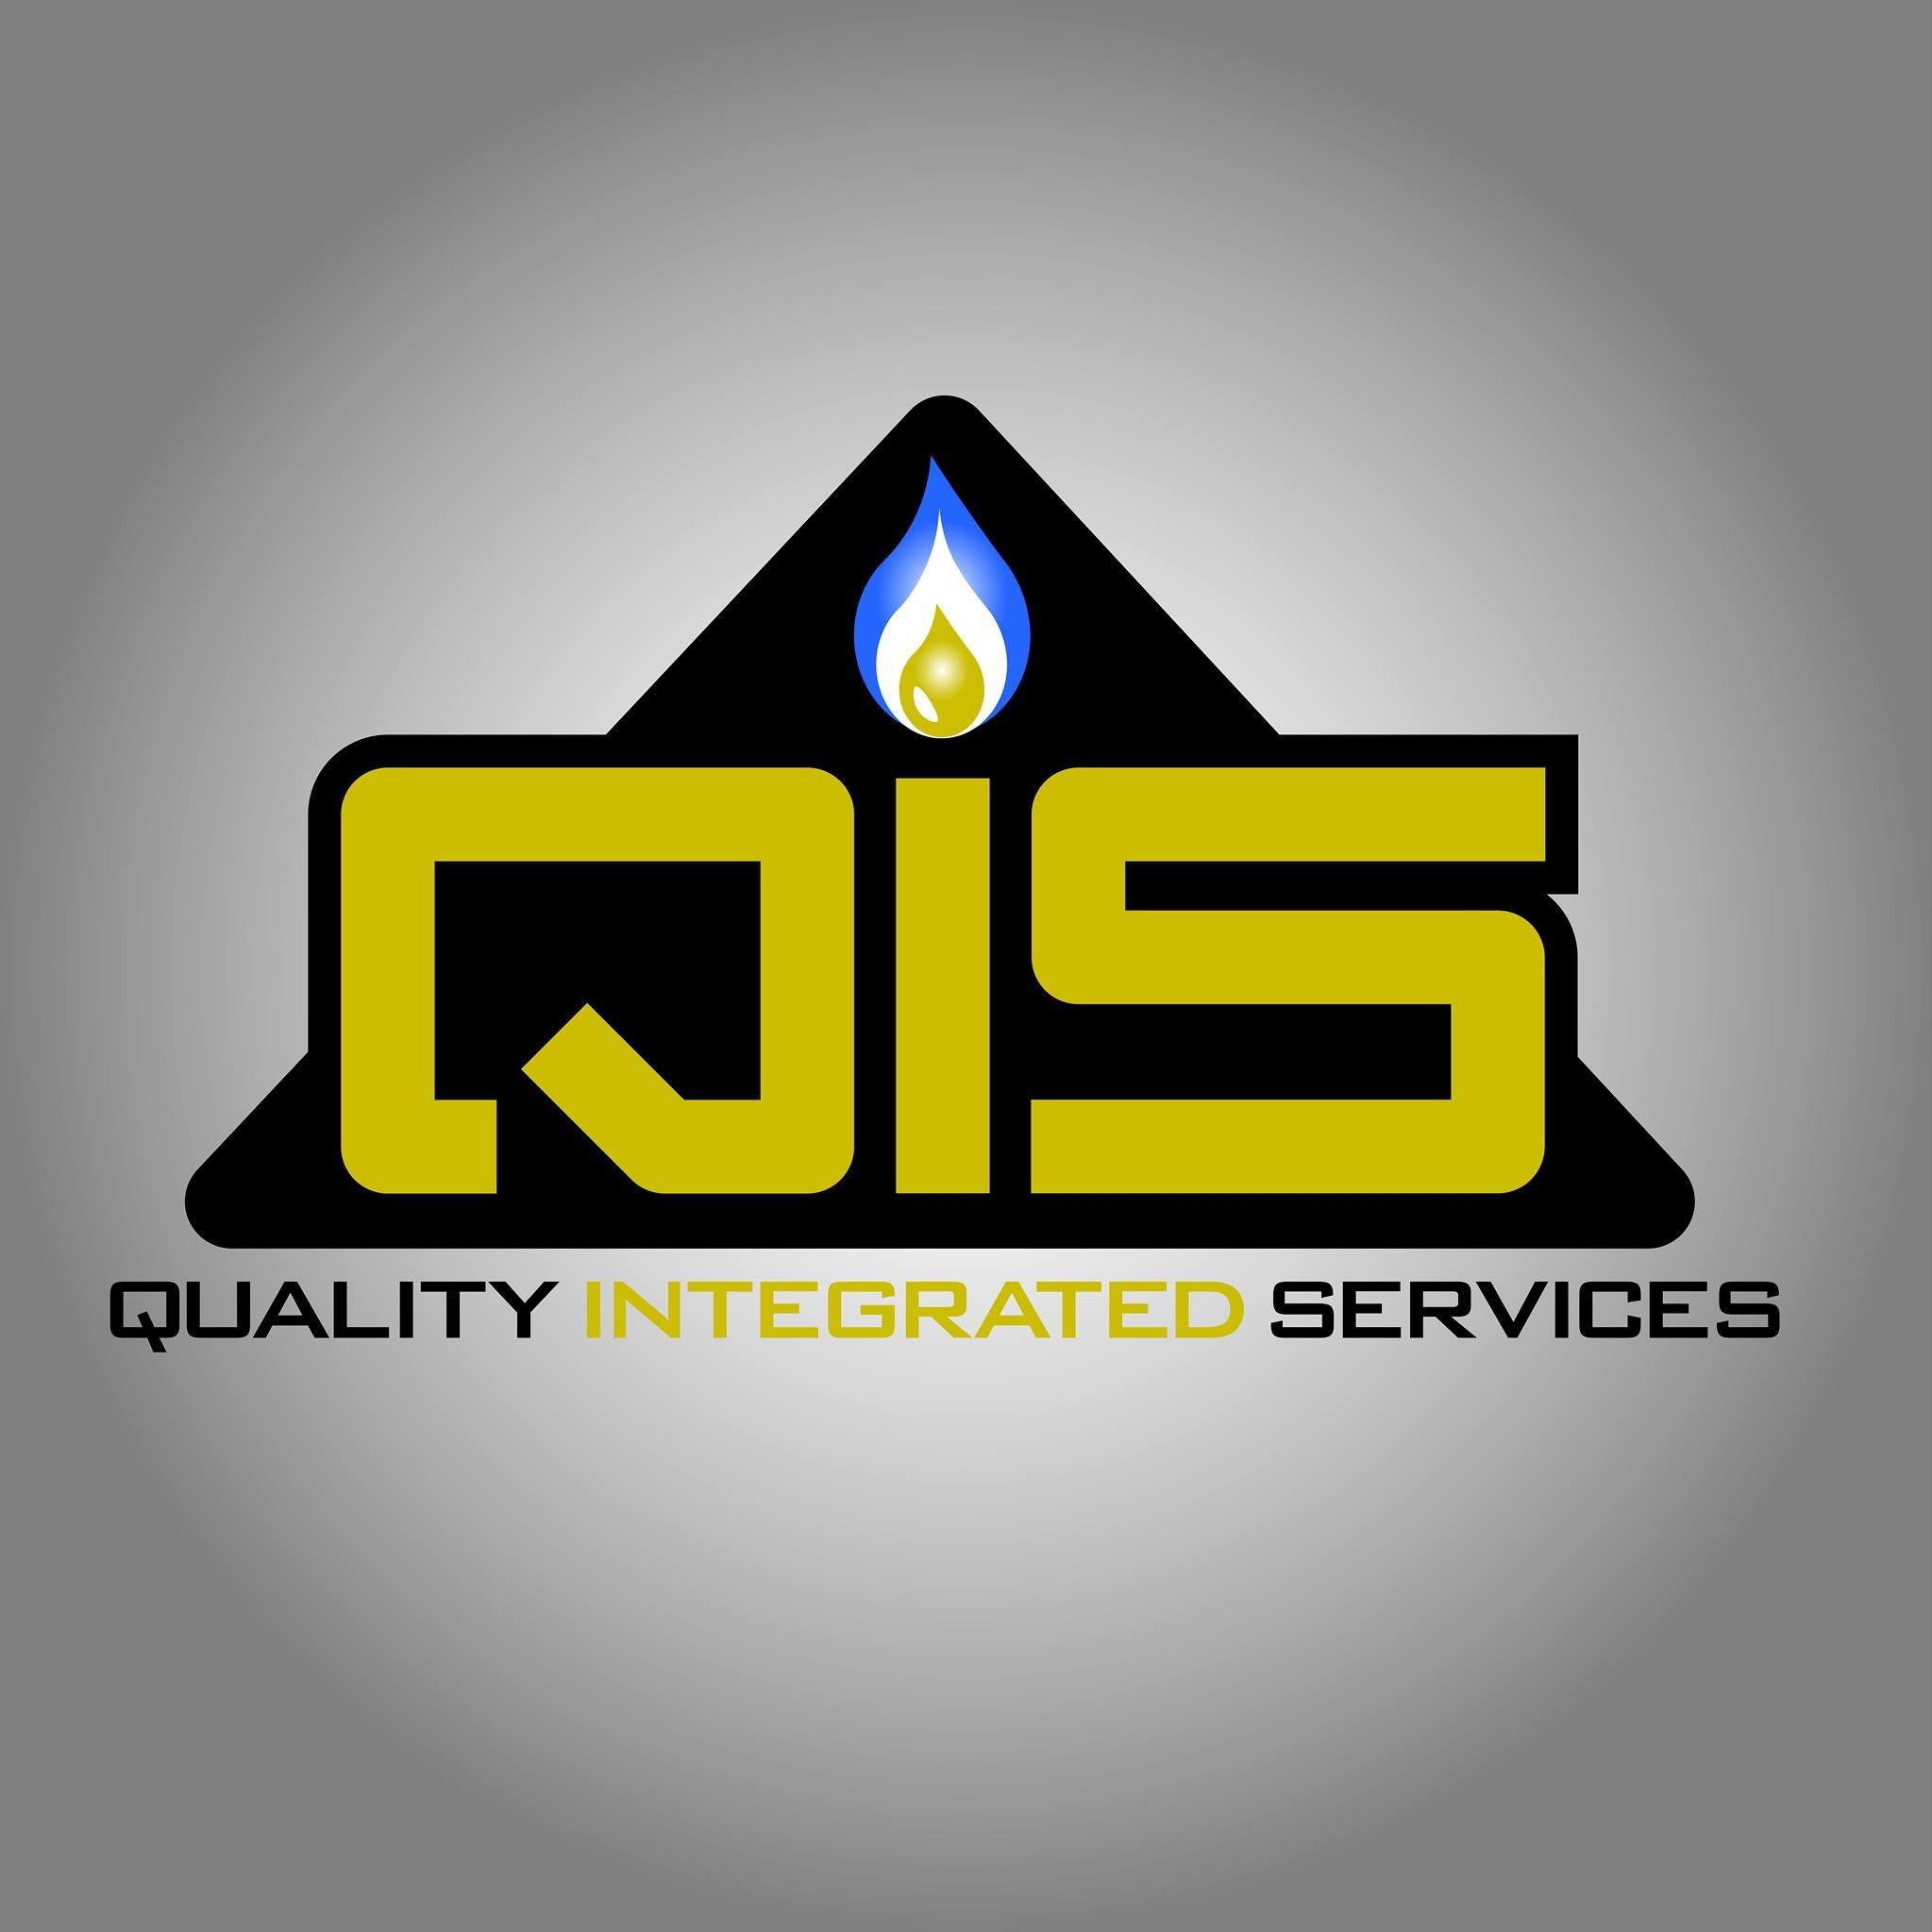 Quality Integrated Services